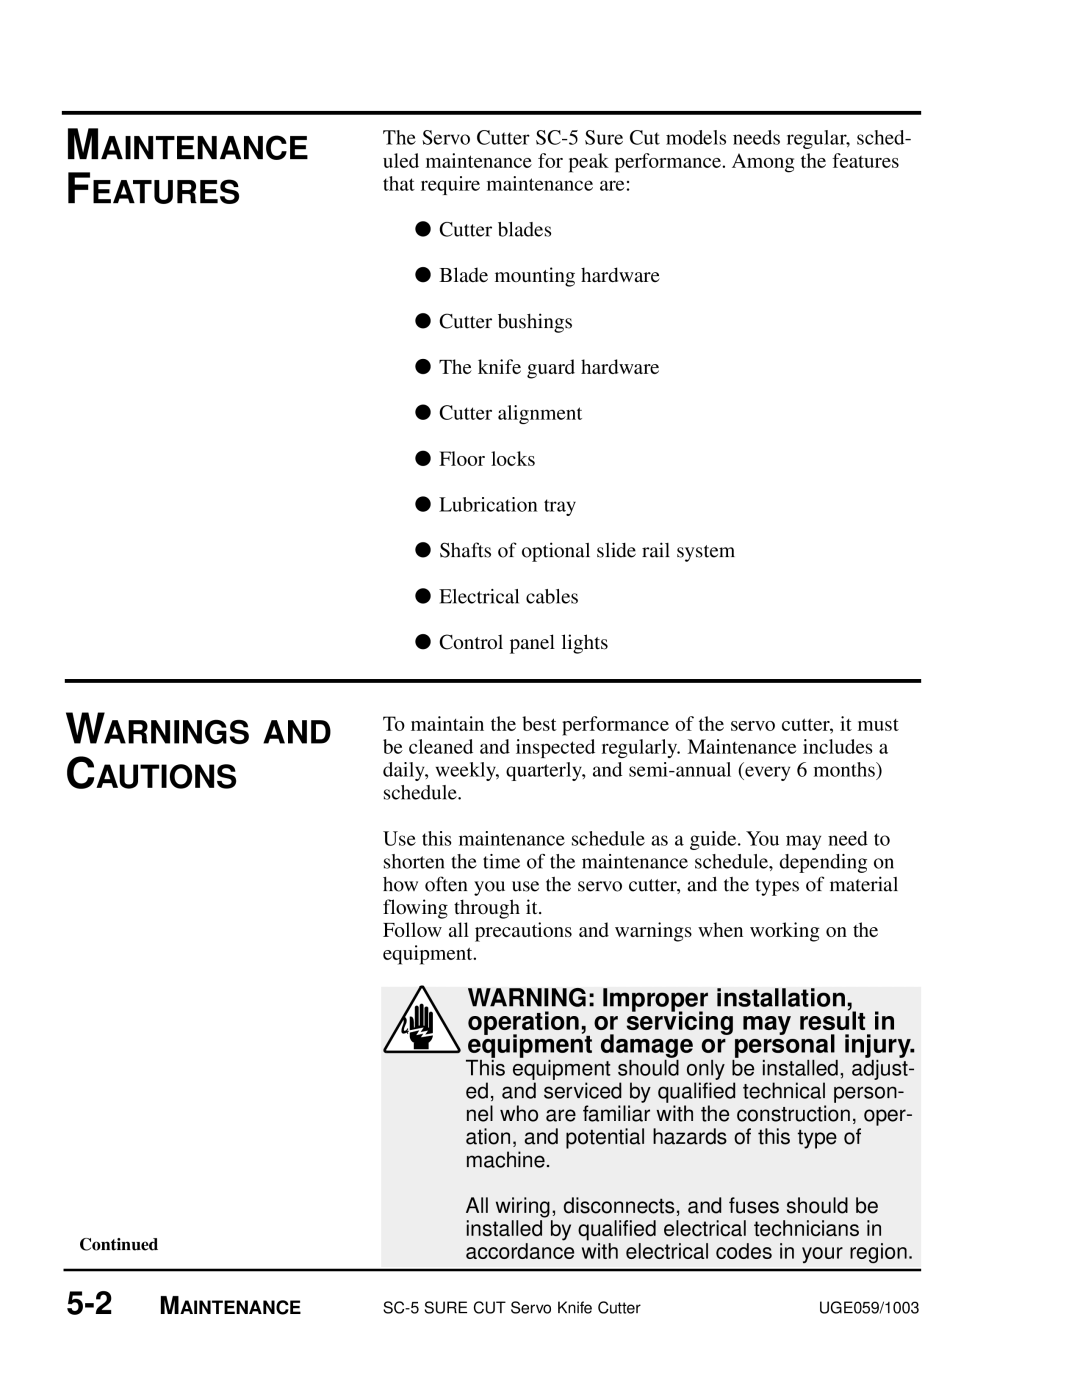 Conair SC-5 manual Maintenance Features Warnings And Cautions 